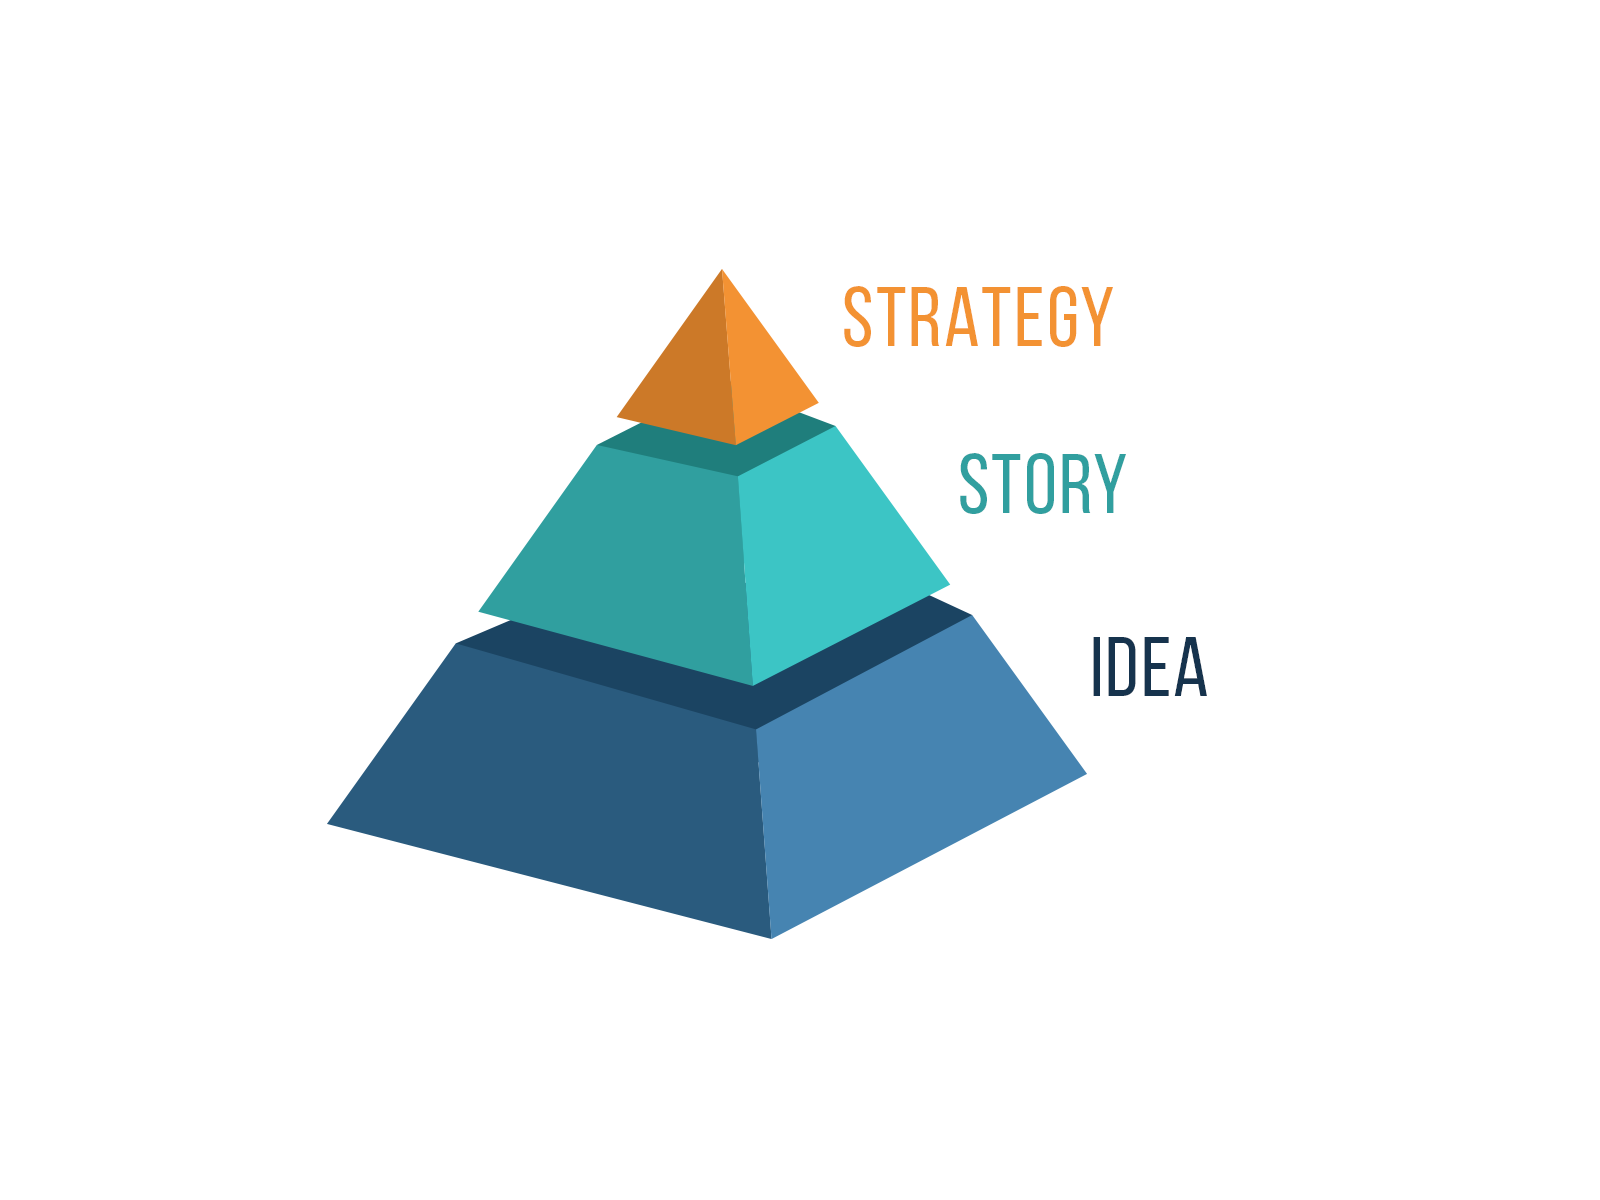 stages of web production: Idea, Story and Strategy